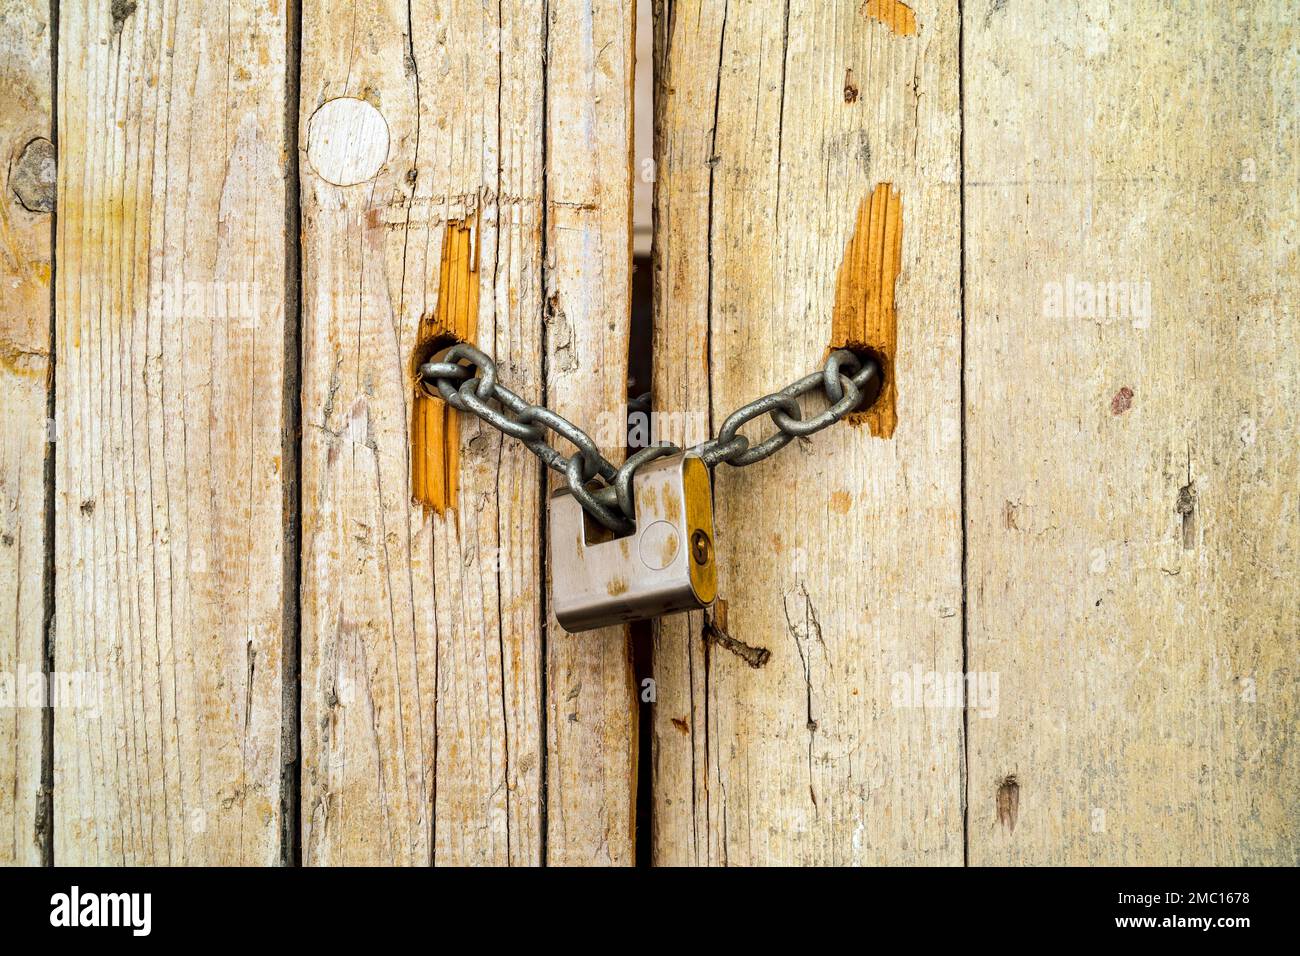 Rusty padlock locking old wooden door with a chain, Tavira, Portugal Stock Photo